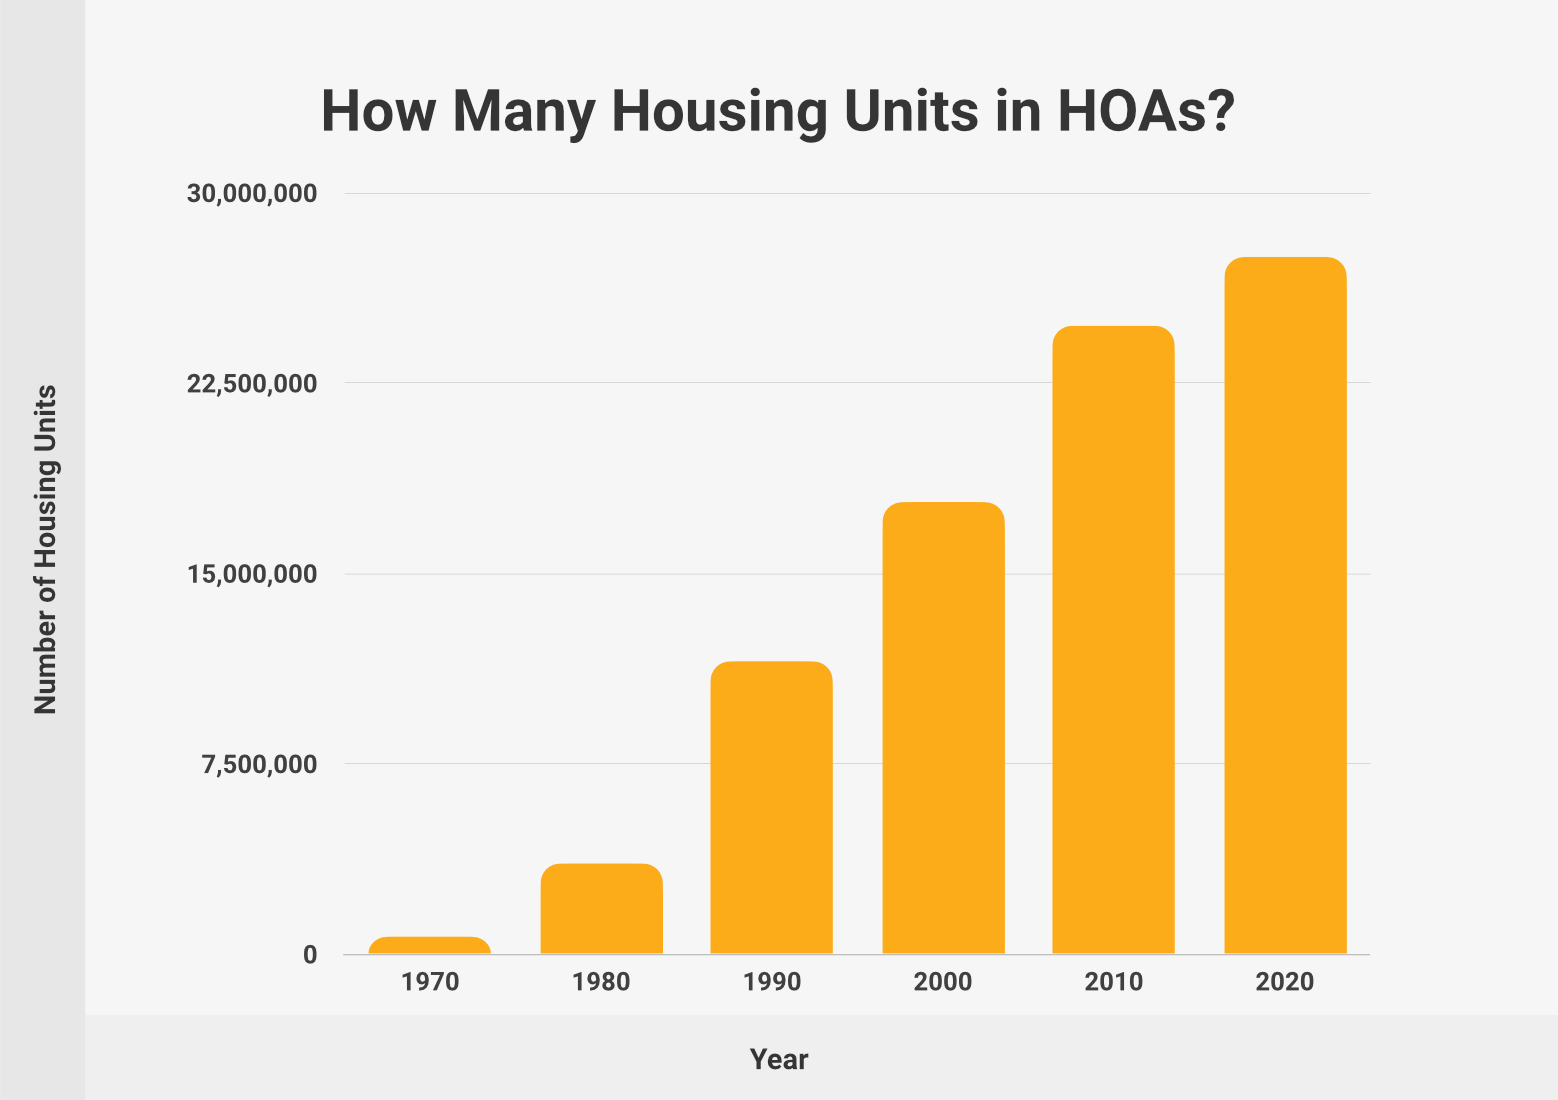 How Many Housing Units in HOAs